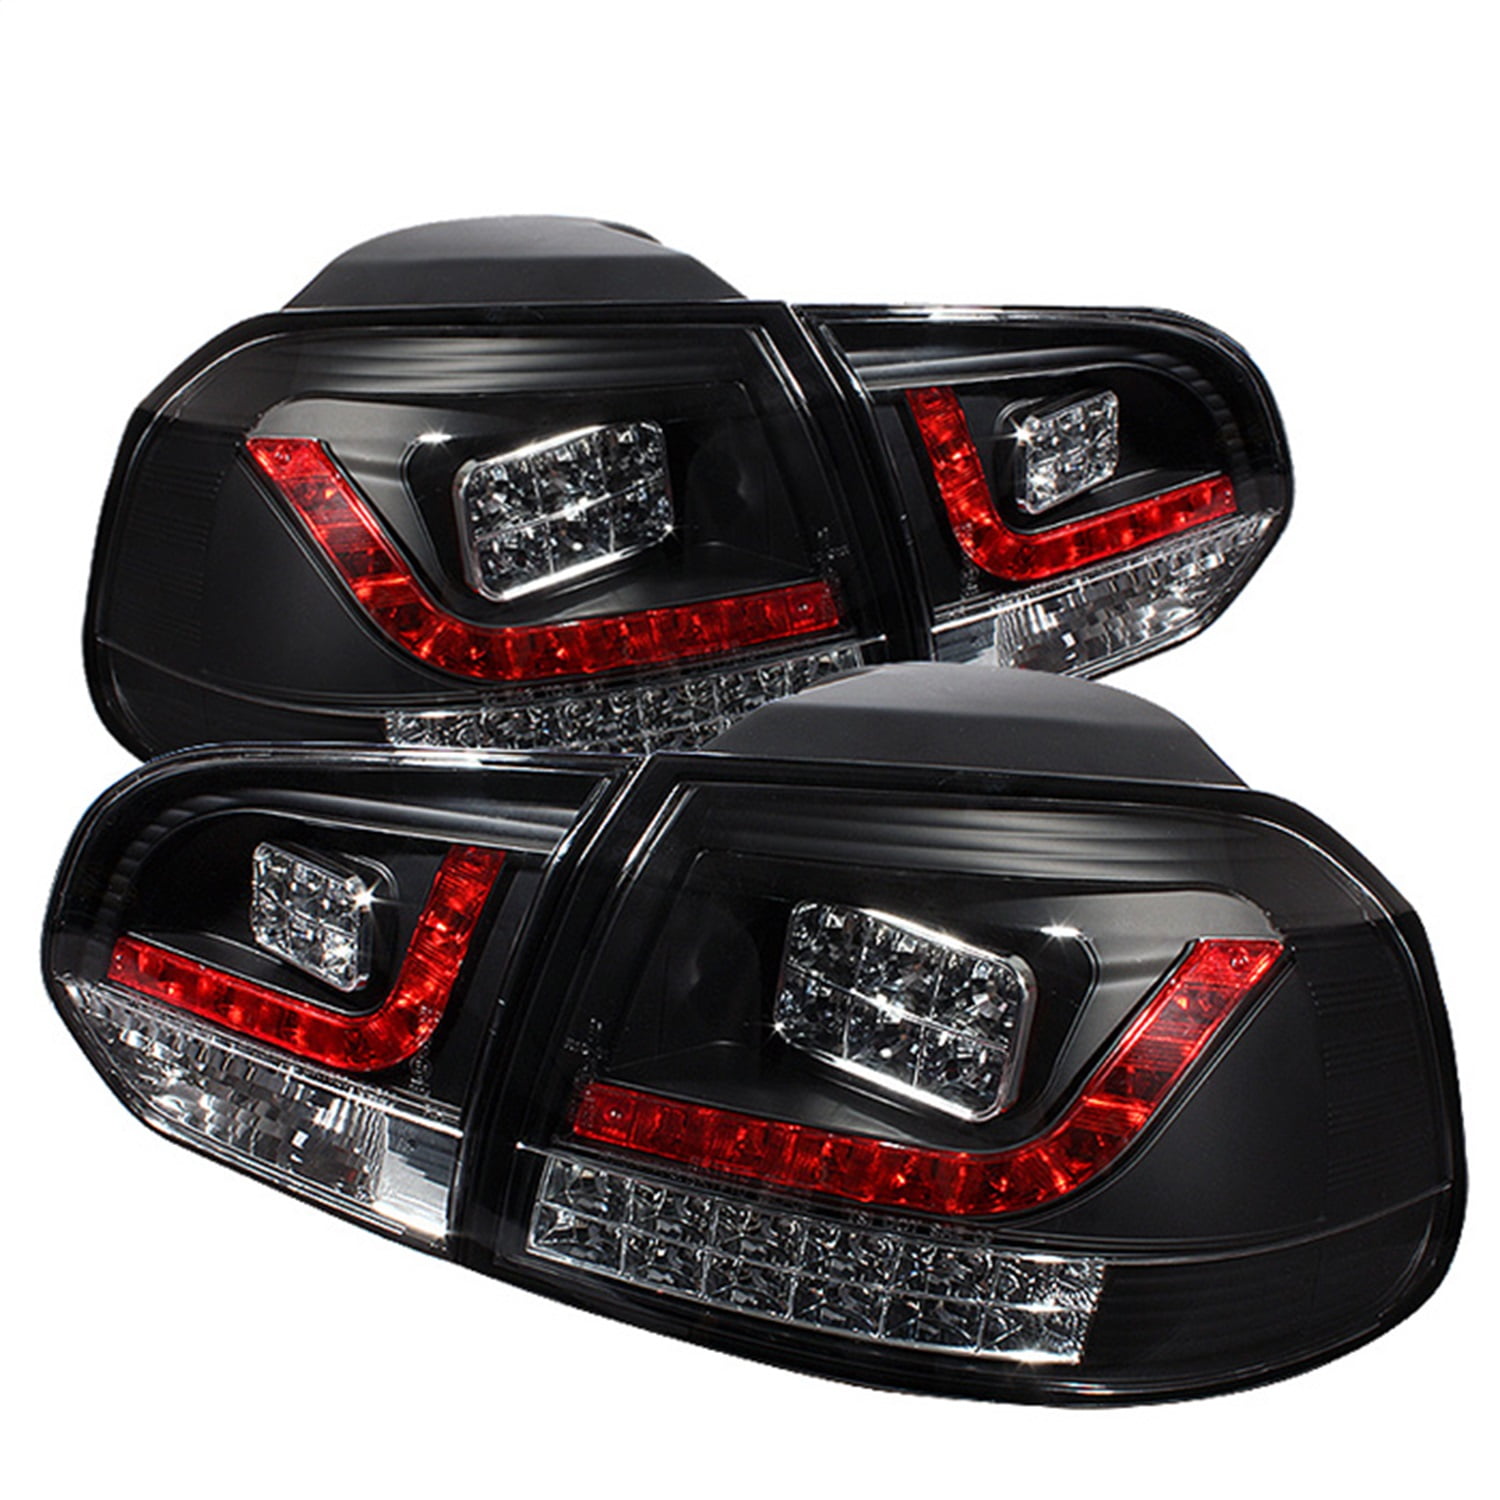 VW Golf 6 MK6 GTI Clear/Smoked LED Tail Lights (2008-2014)